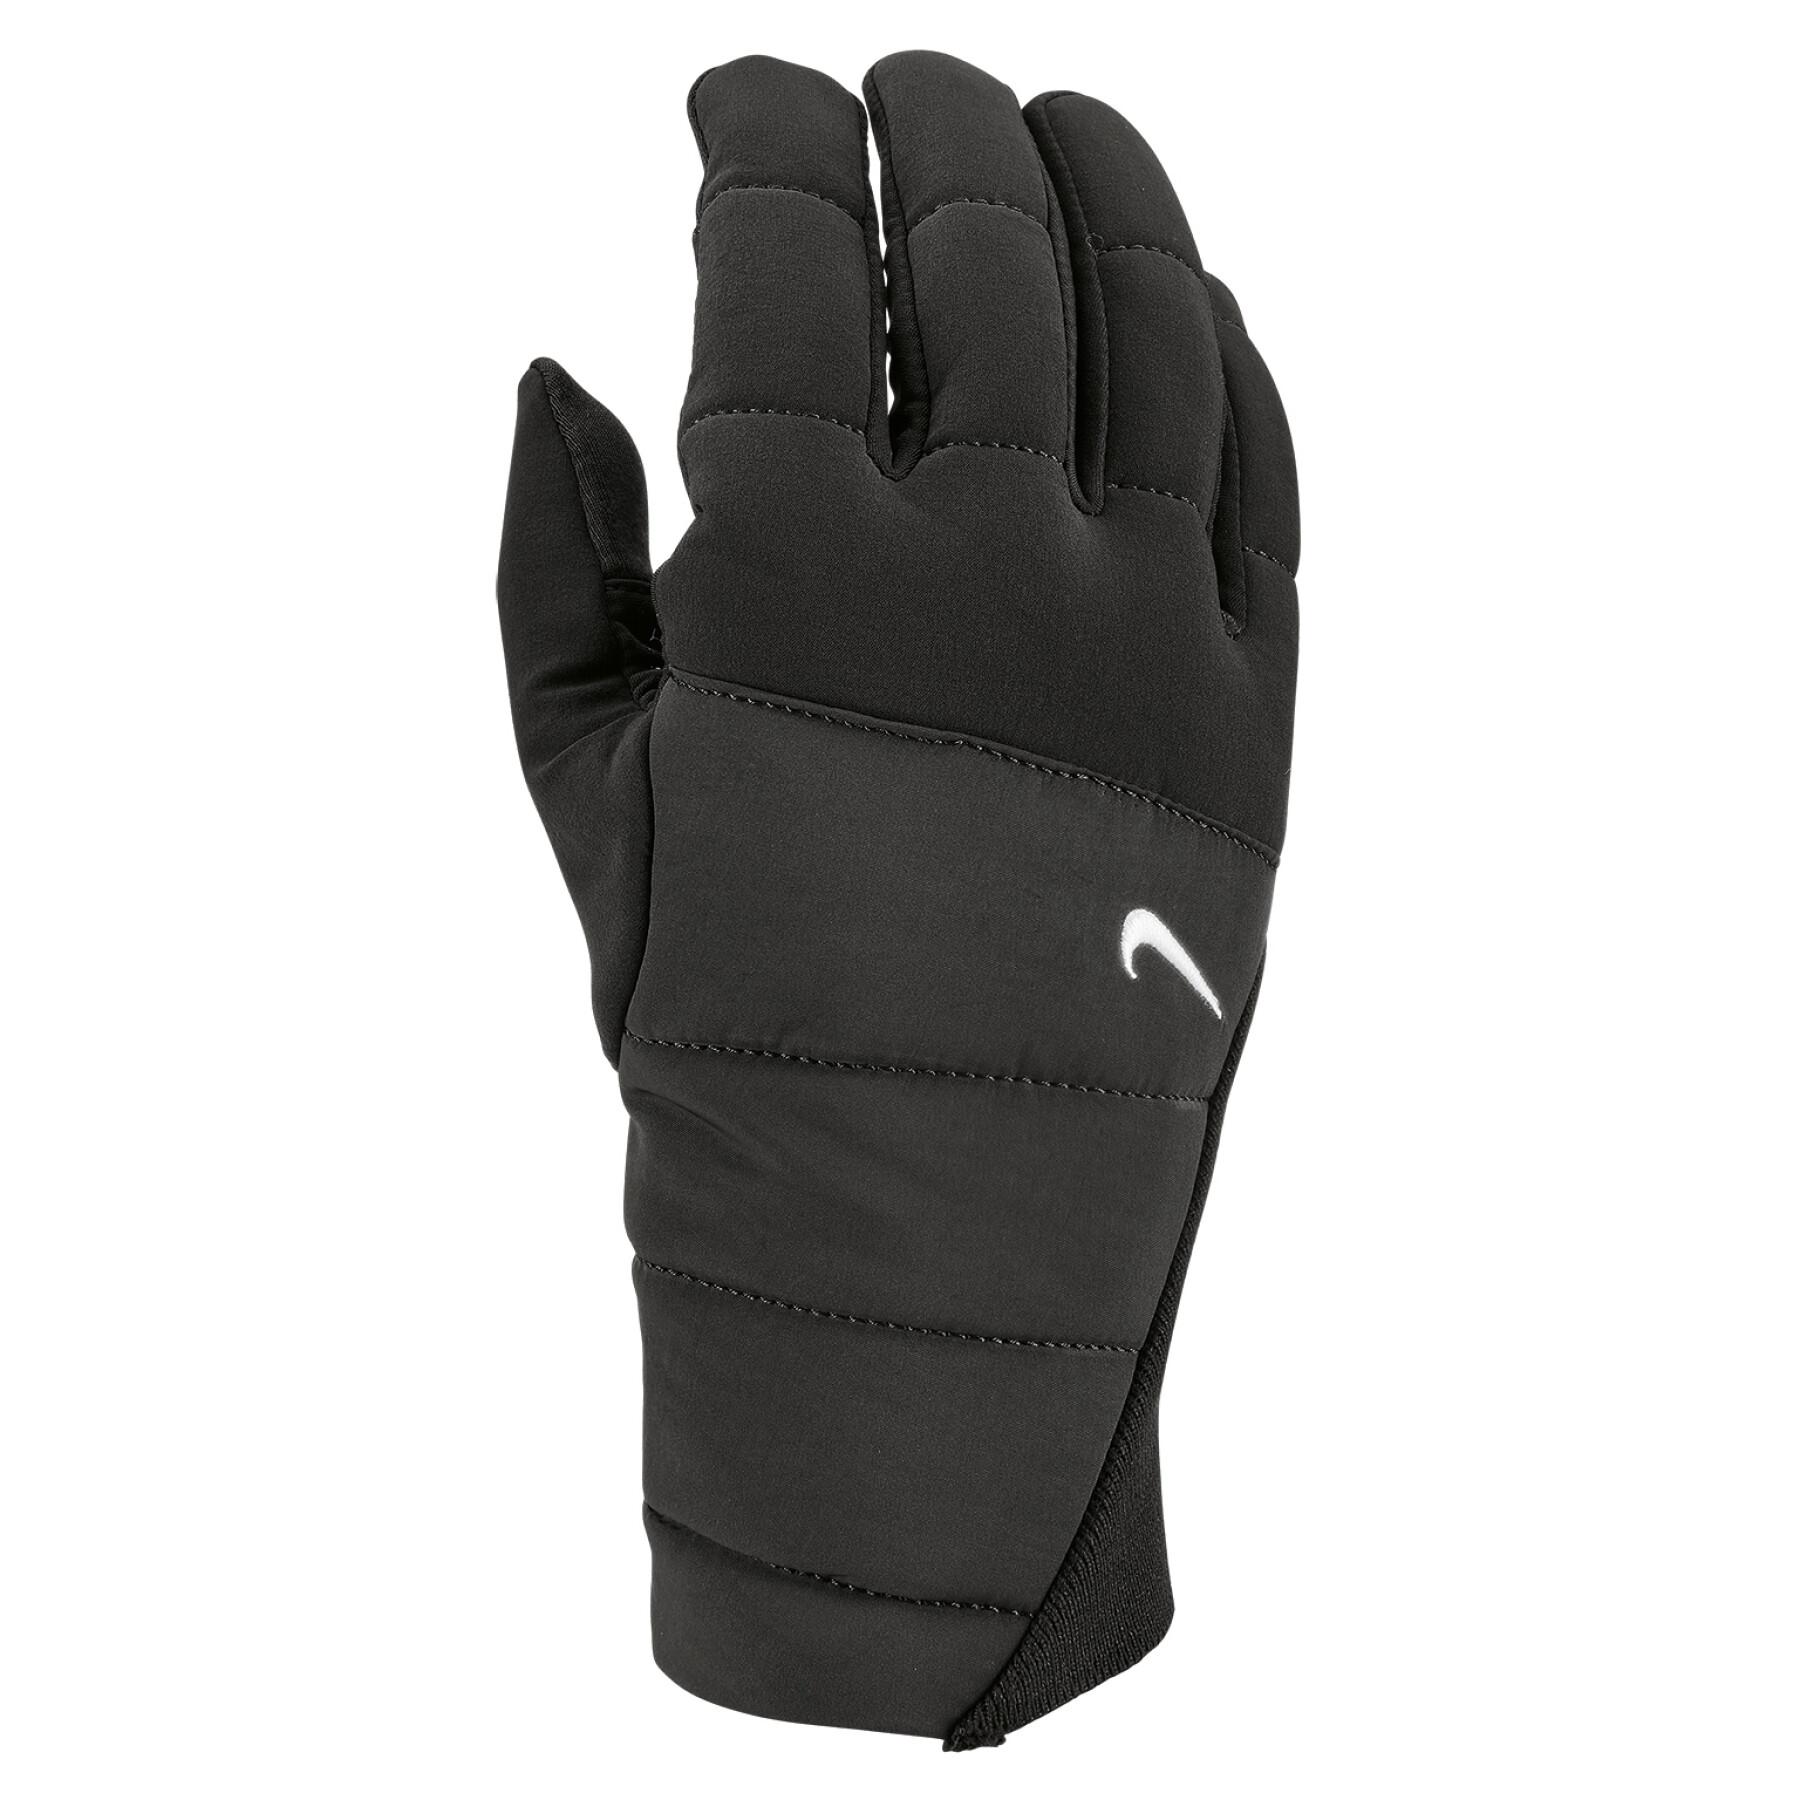 Handschuhe Nike Quilted TG